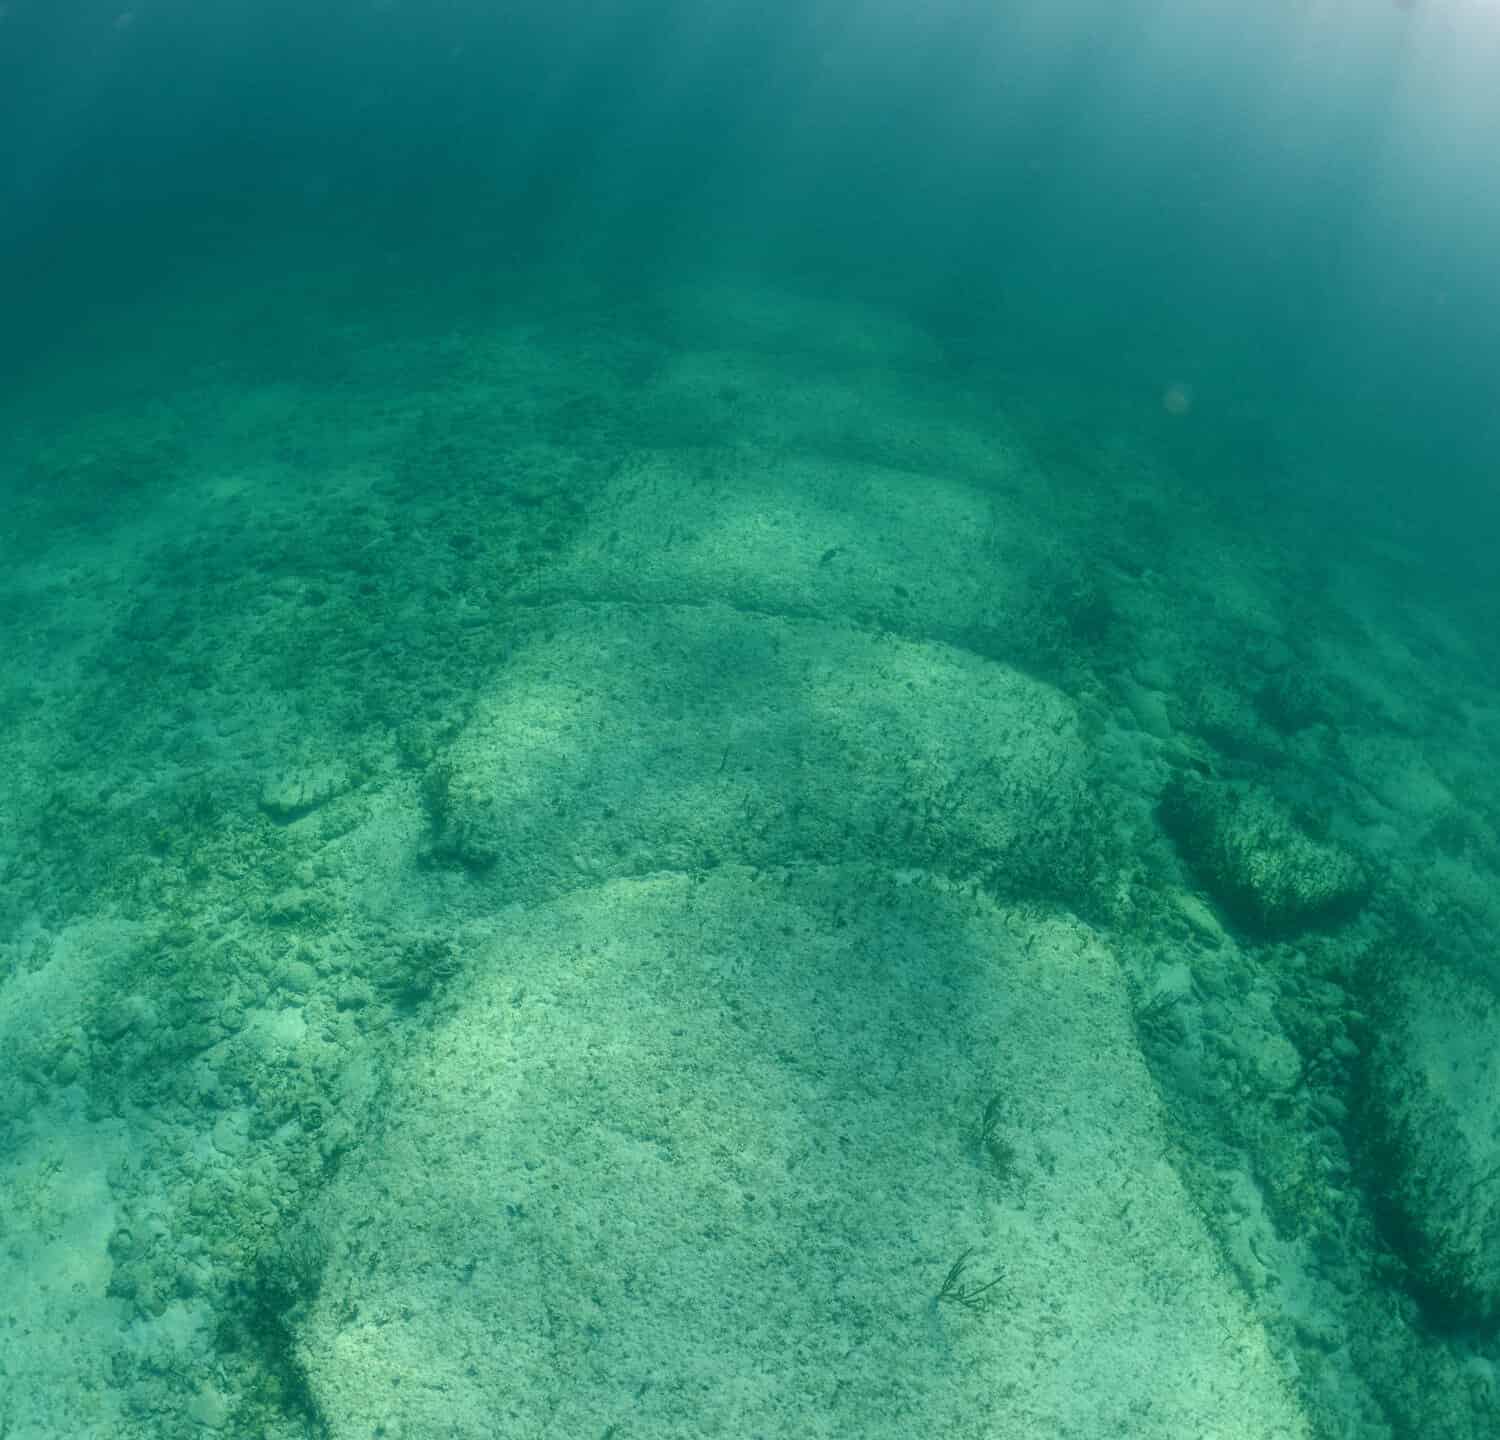 Underwater rock formation in the Bahamas named Bimini Road that is thought by some to be remnants of Atlantis